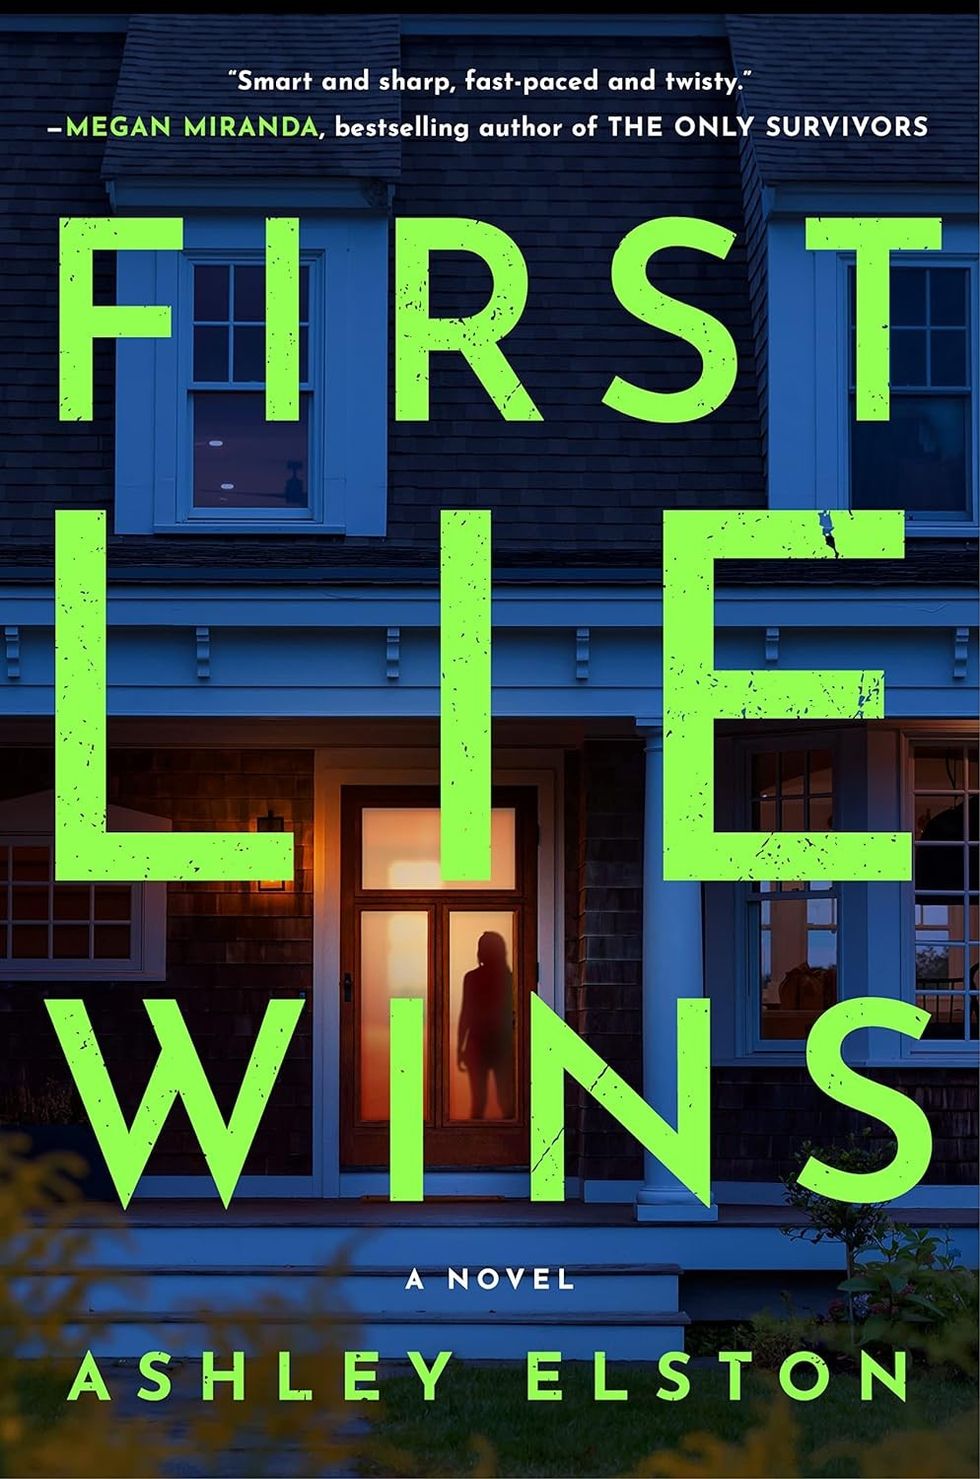 "First Lie Wins" by Ashley Elston